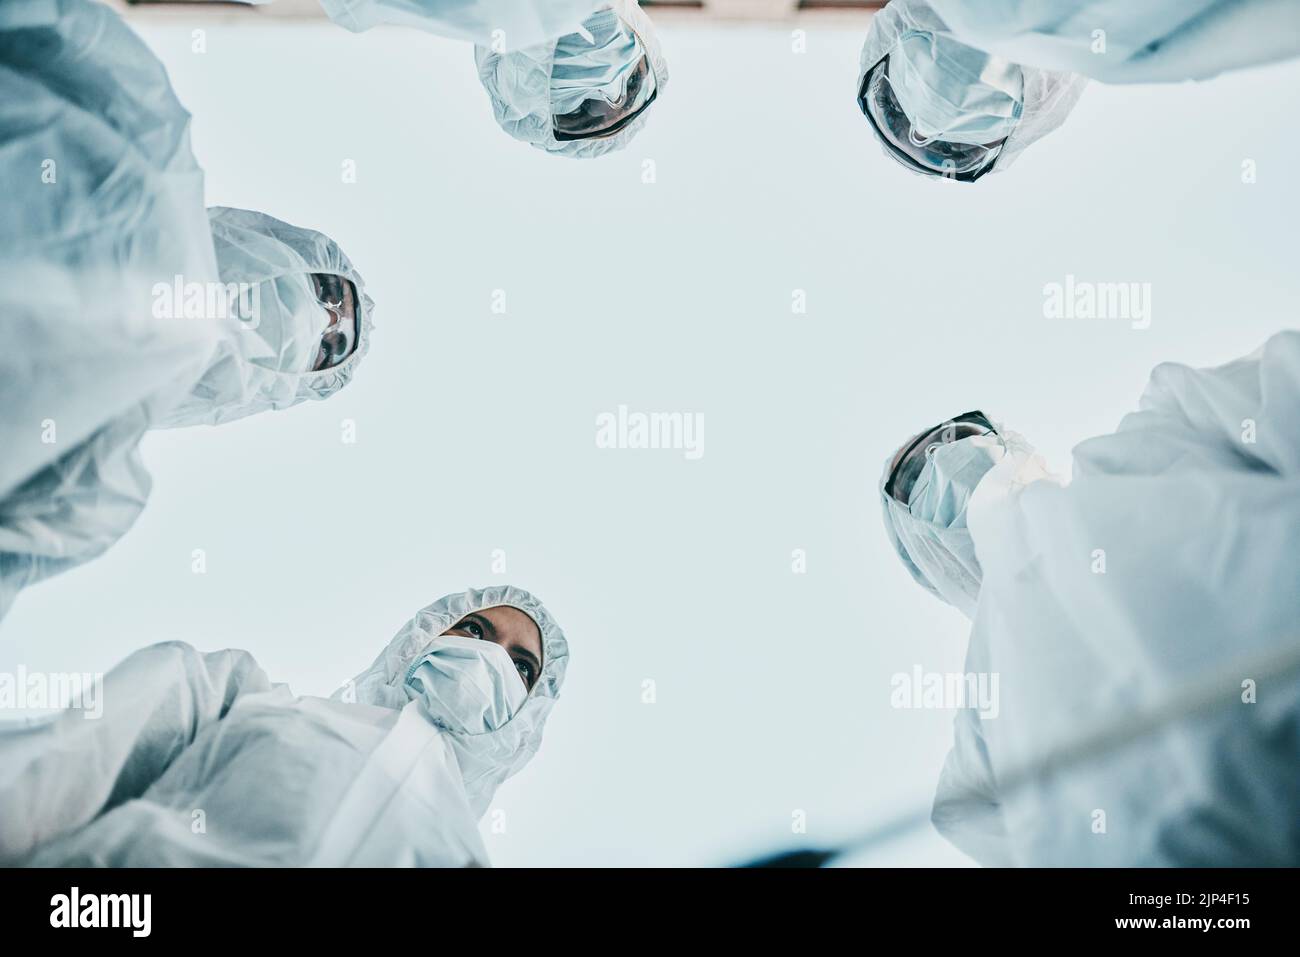 Covid pandemic outbreak team of doctors or medical workers wearing protective ppe to prevent spread of virus in hospital. Group of scientists wearing Stock Photo